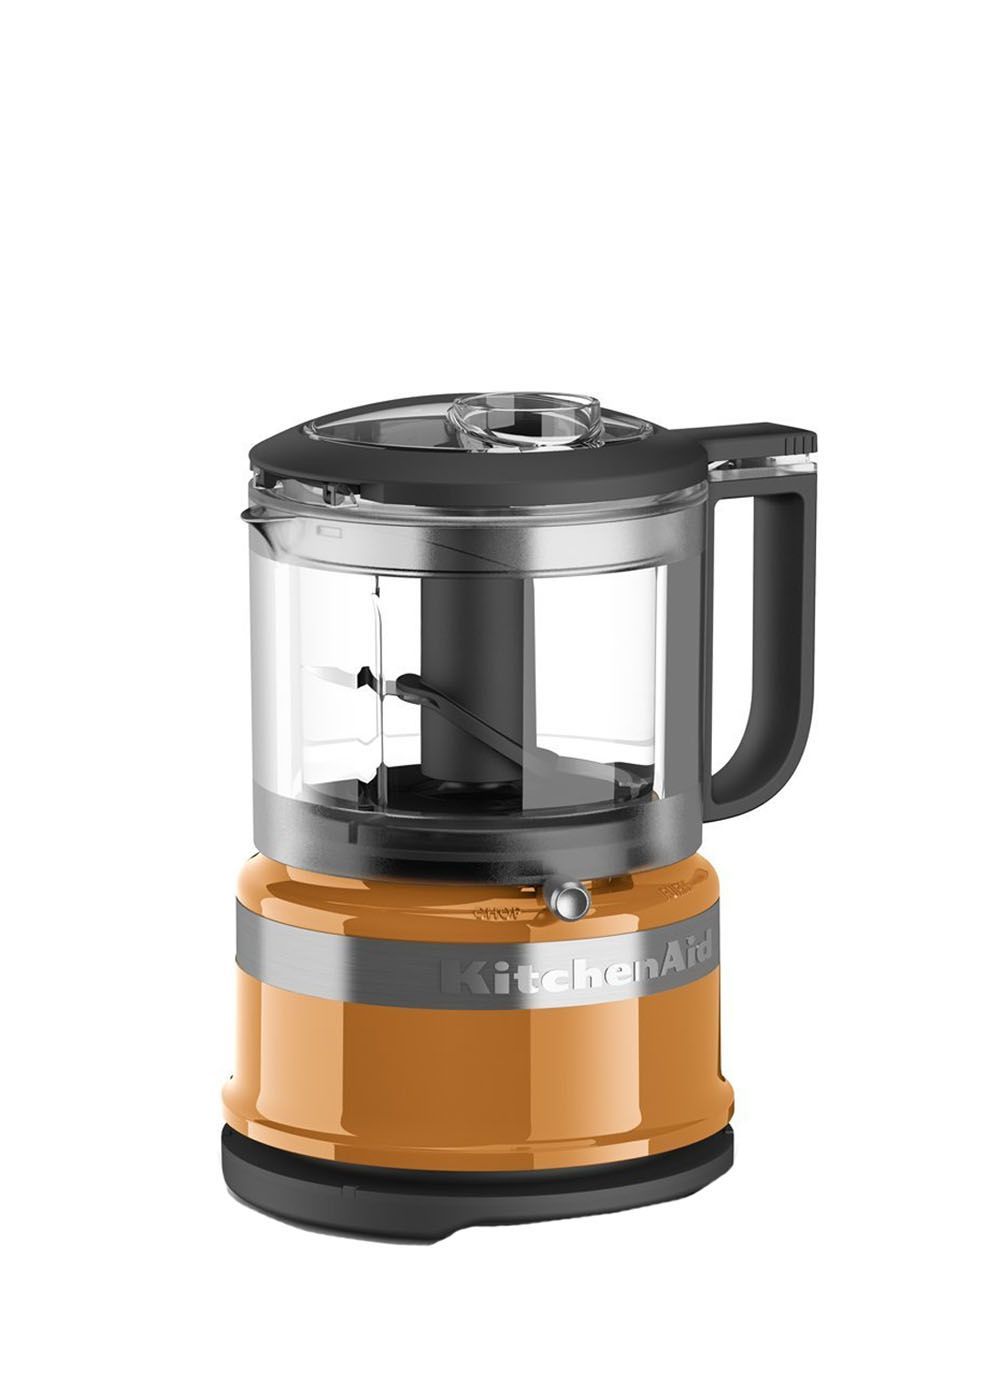 The Best Food Processors 2019 - Top Food Processor and ...